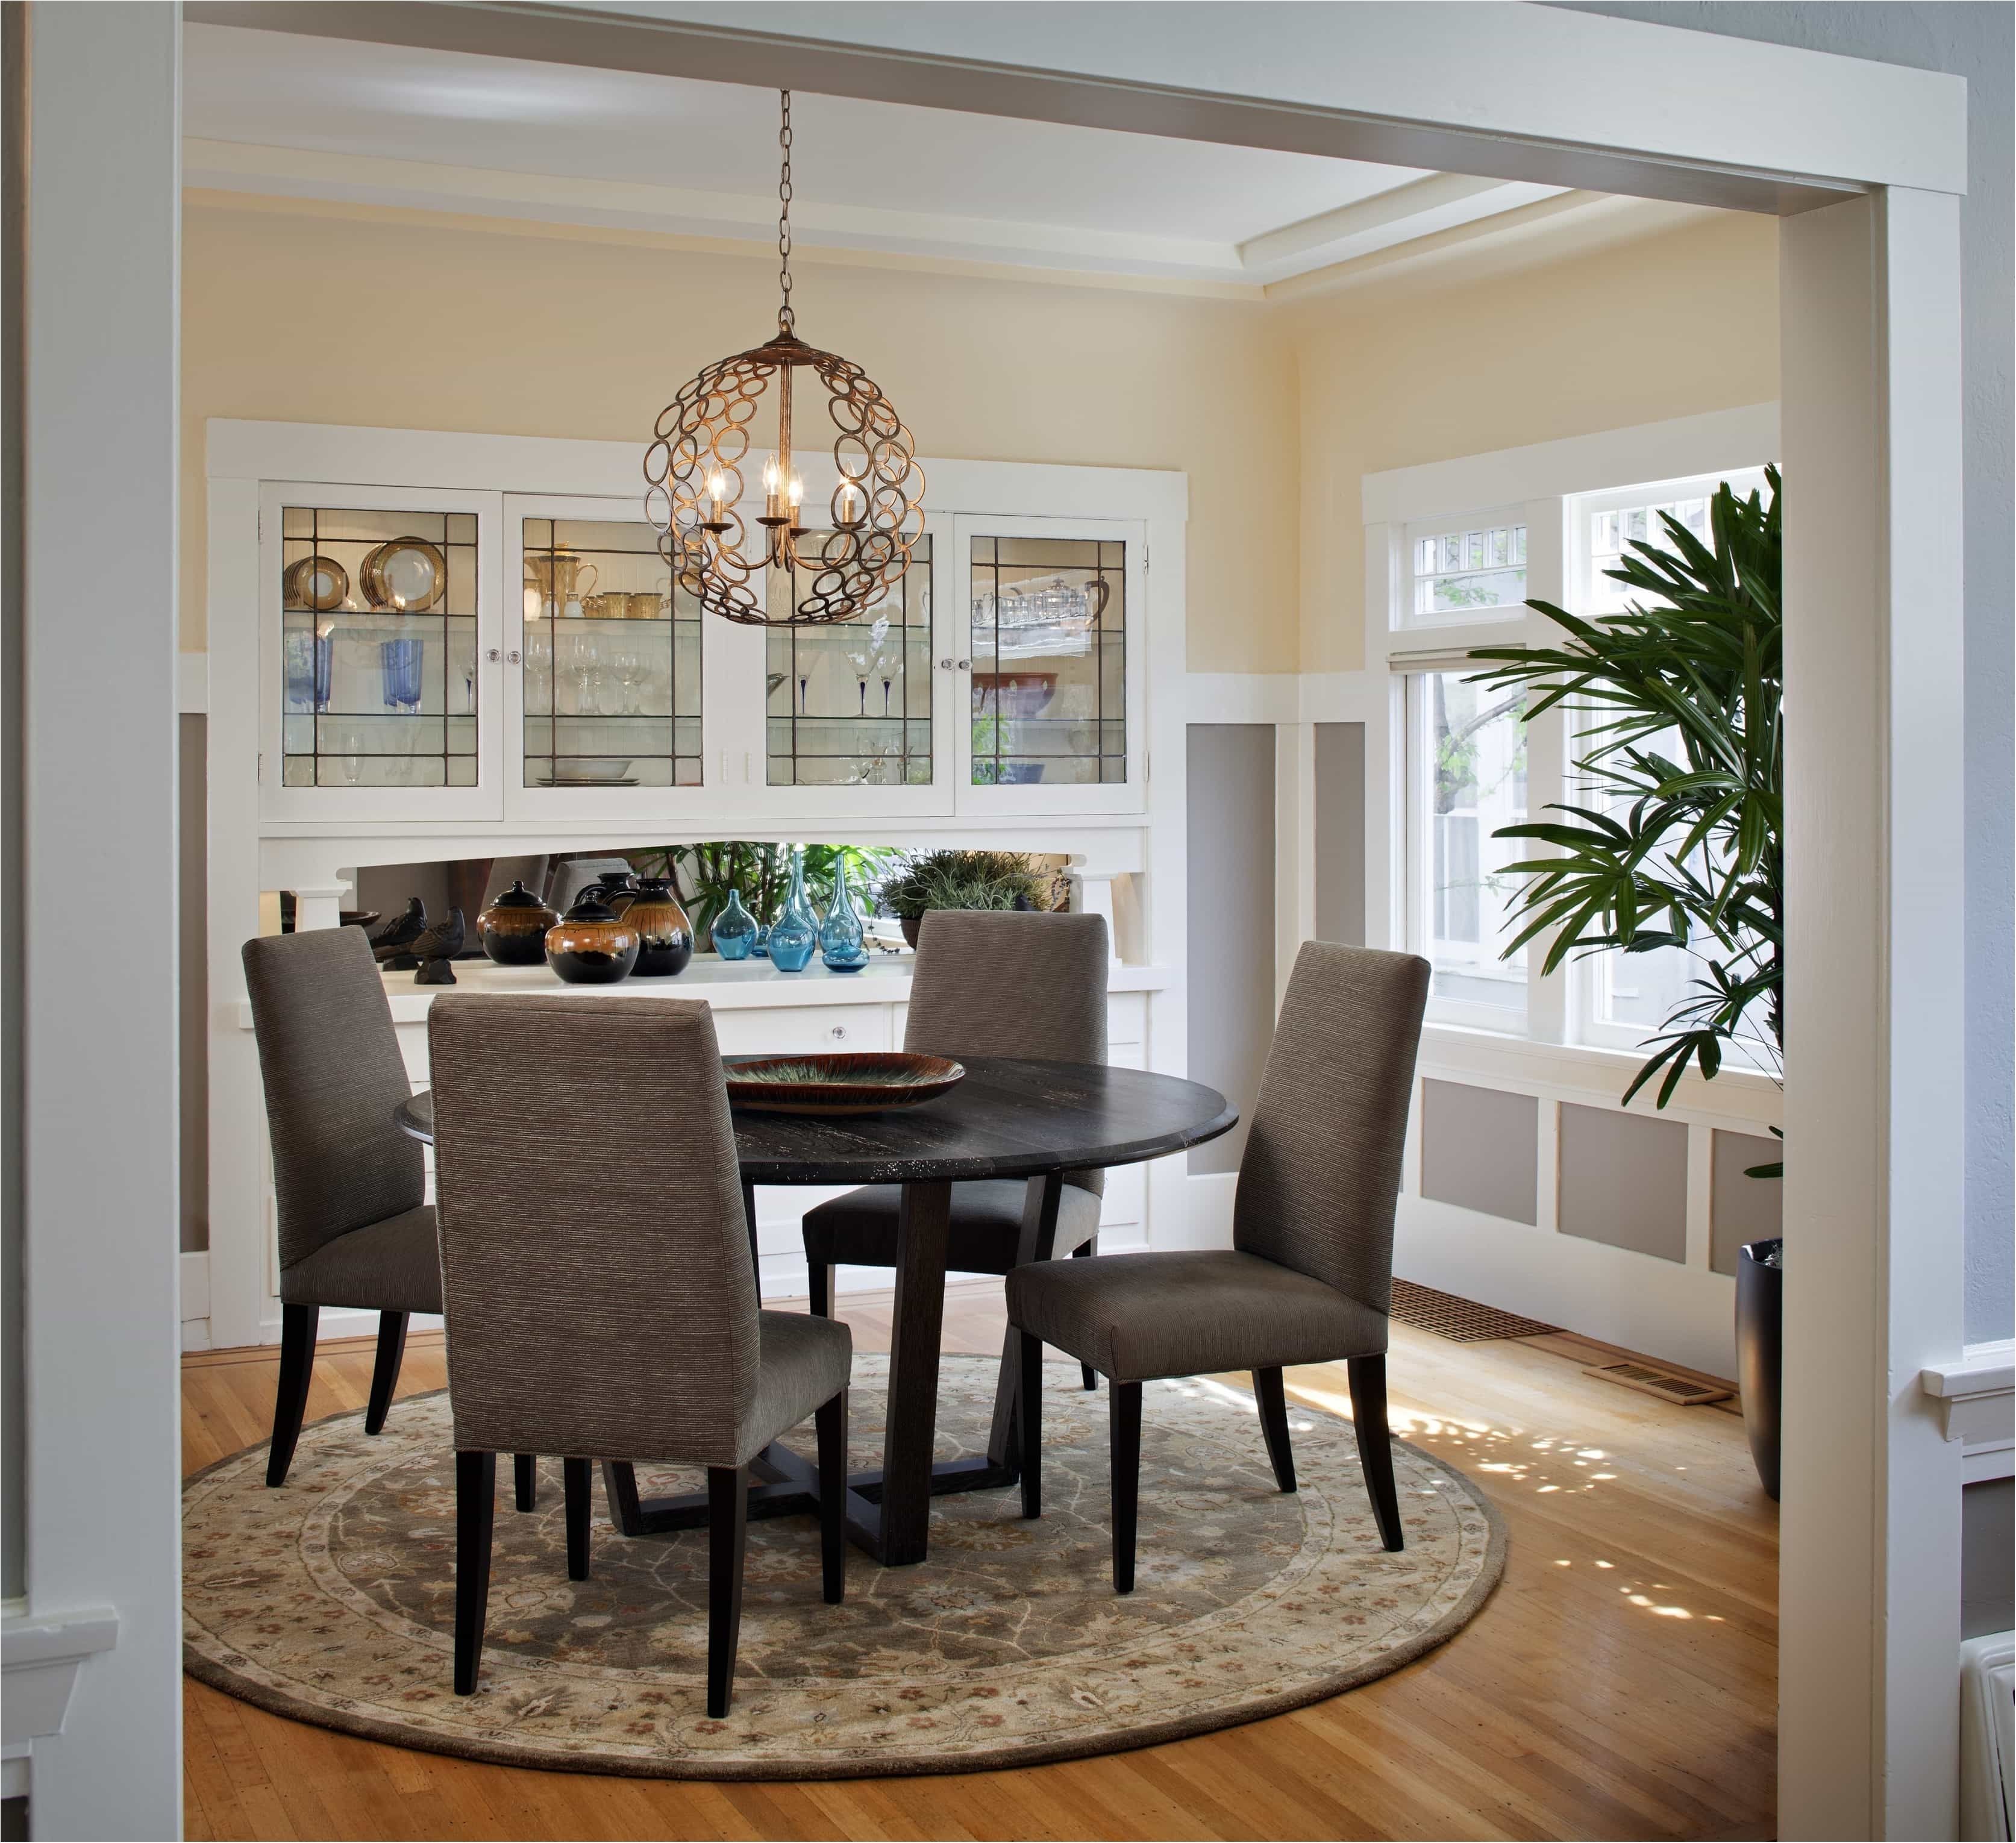 Magnificent Craftsman Lighting For Dining Room With Round Table Inside Newest Craftsman Round Dining Tables (View 14 of 20)